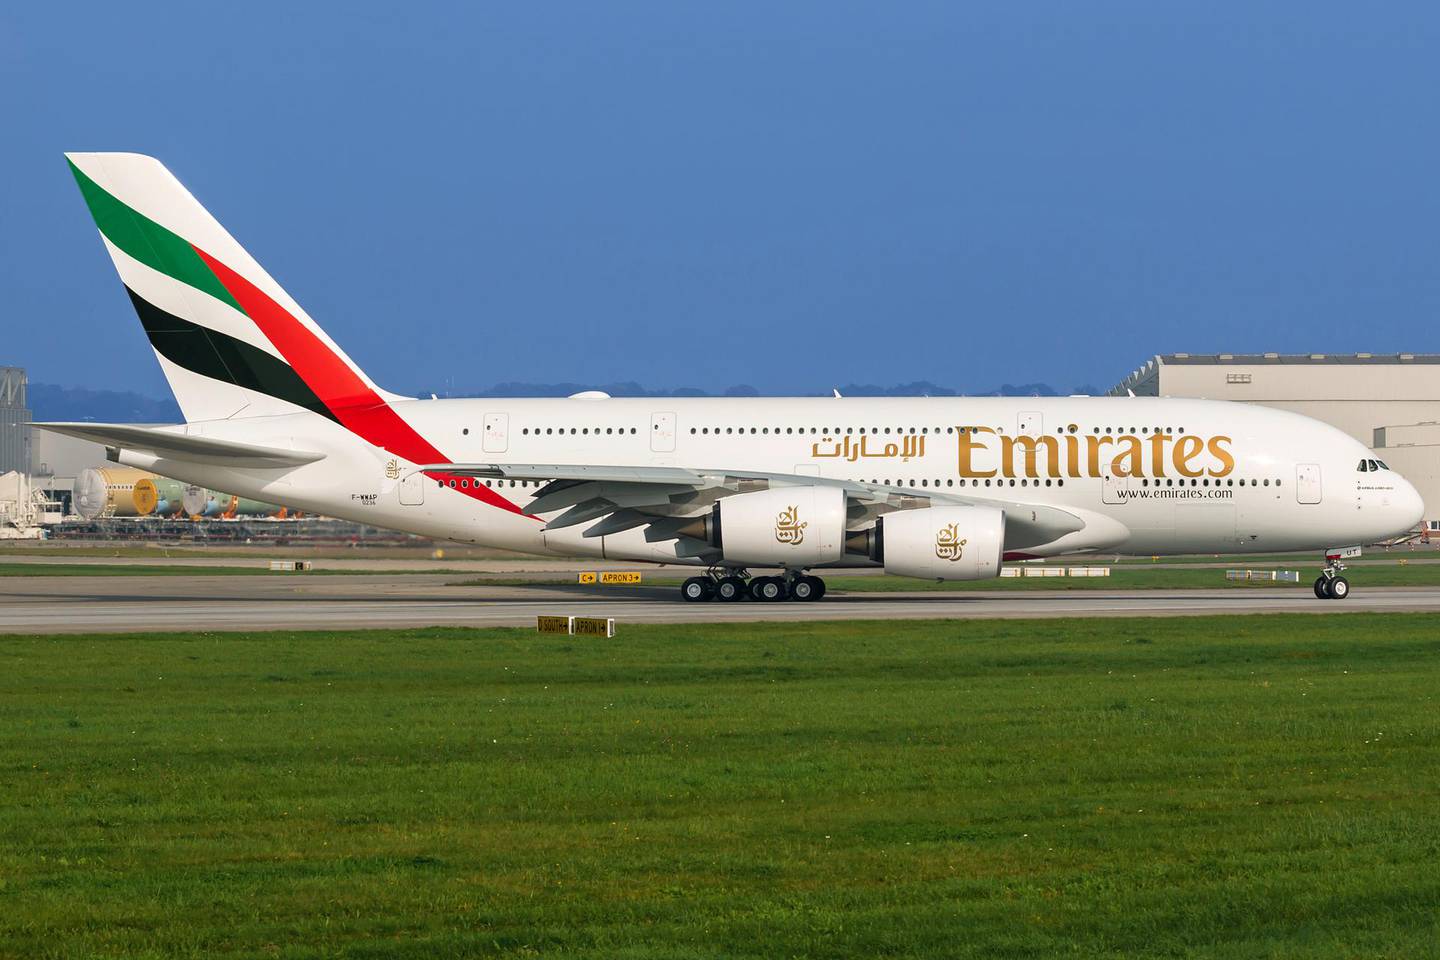 Emirates will fly its A380 superjumbos to Germany's Hamburg and Dusseldorf from October. Photo: Emirates